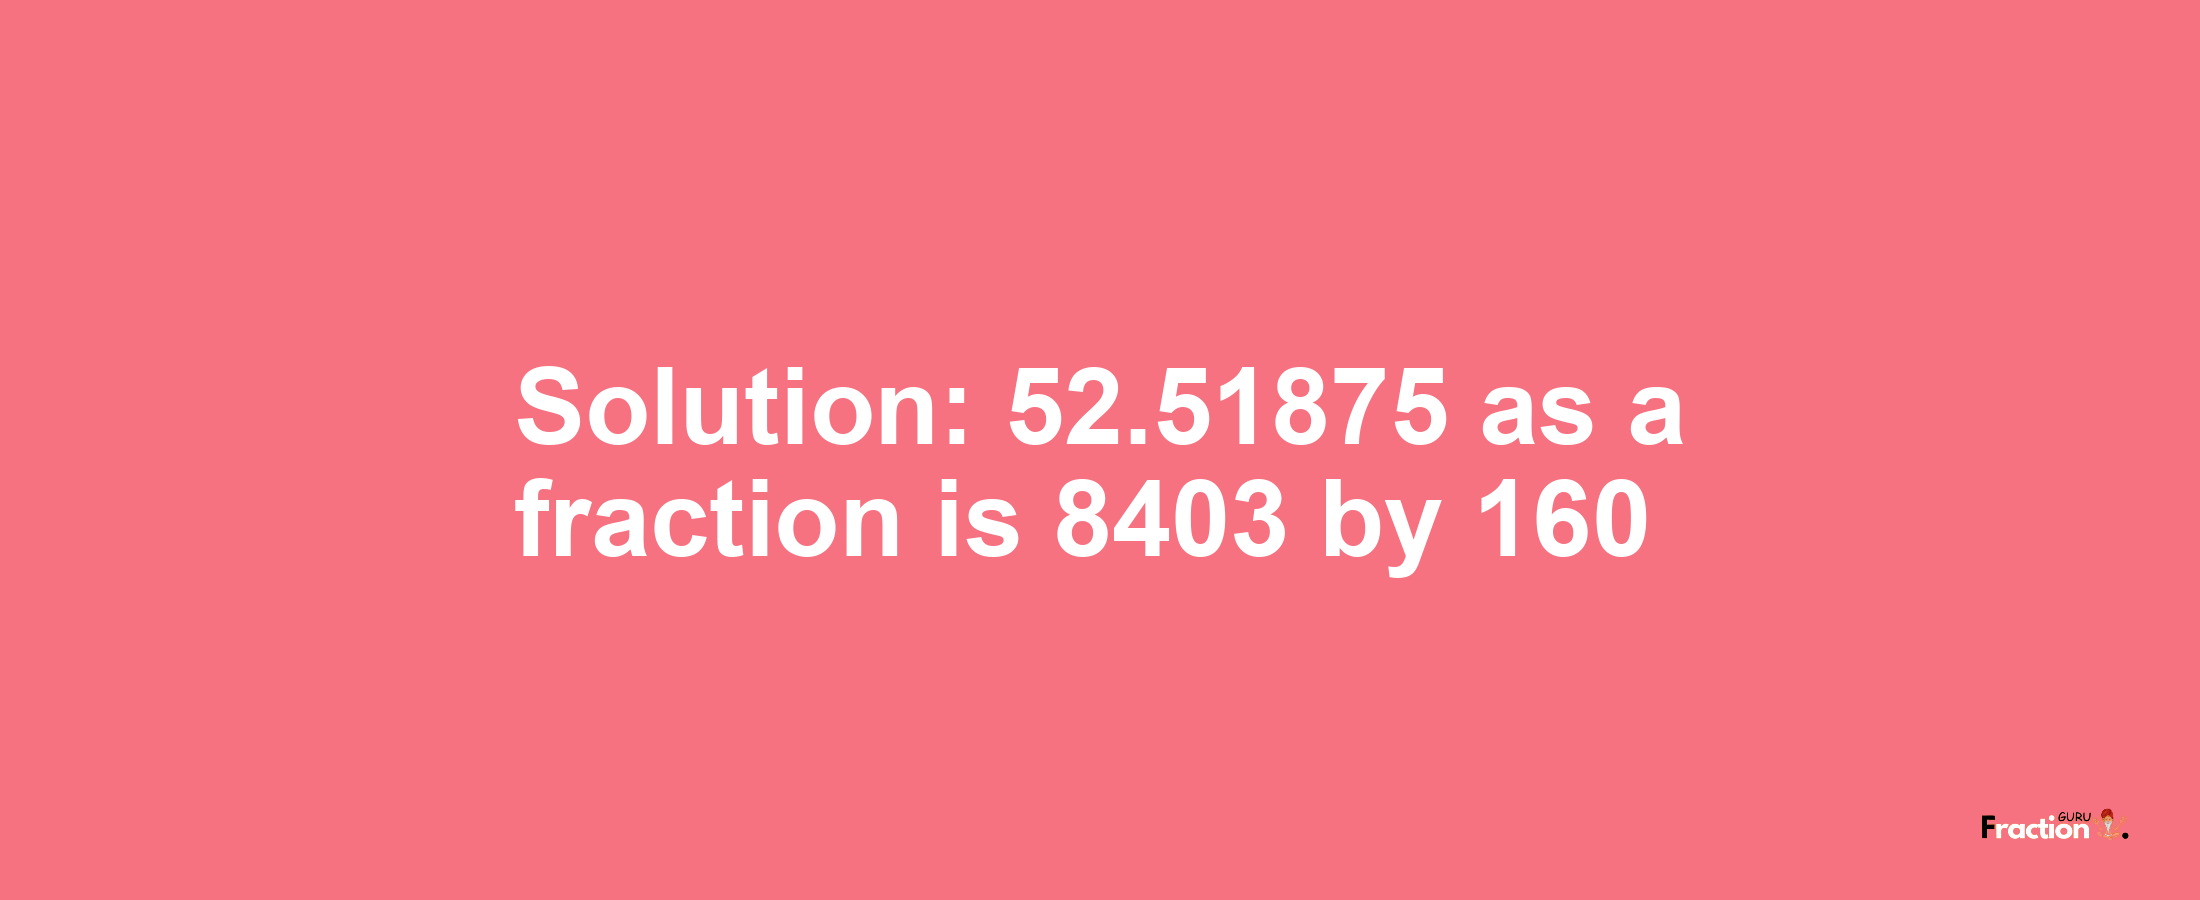 Solution:52.51875 as a fraction is 8403/160